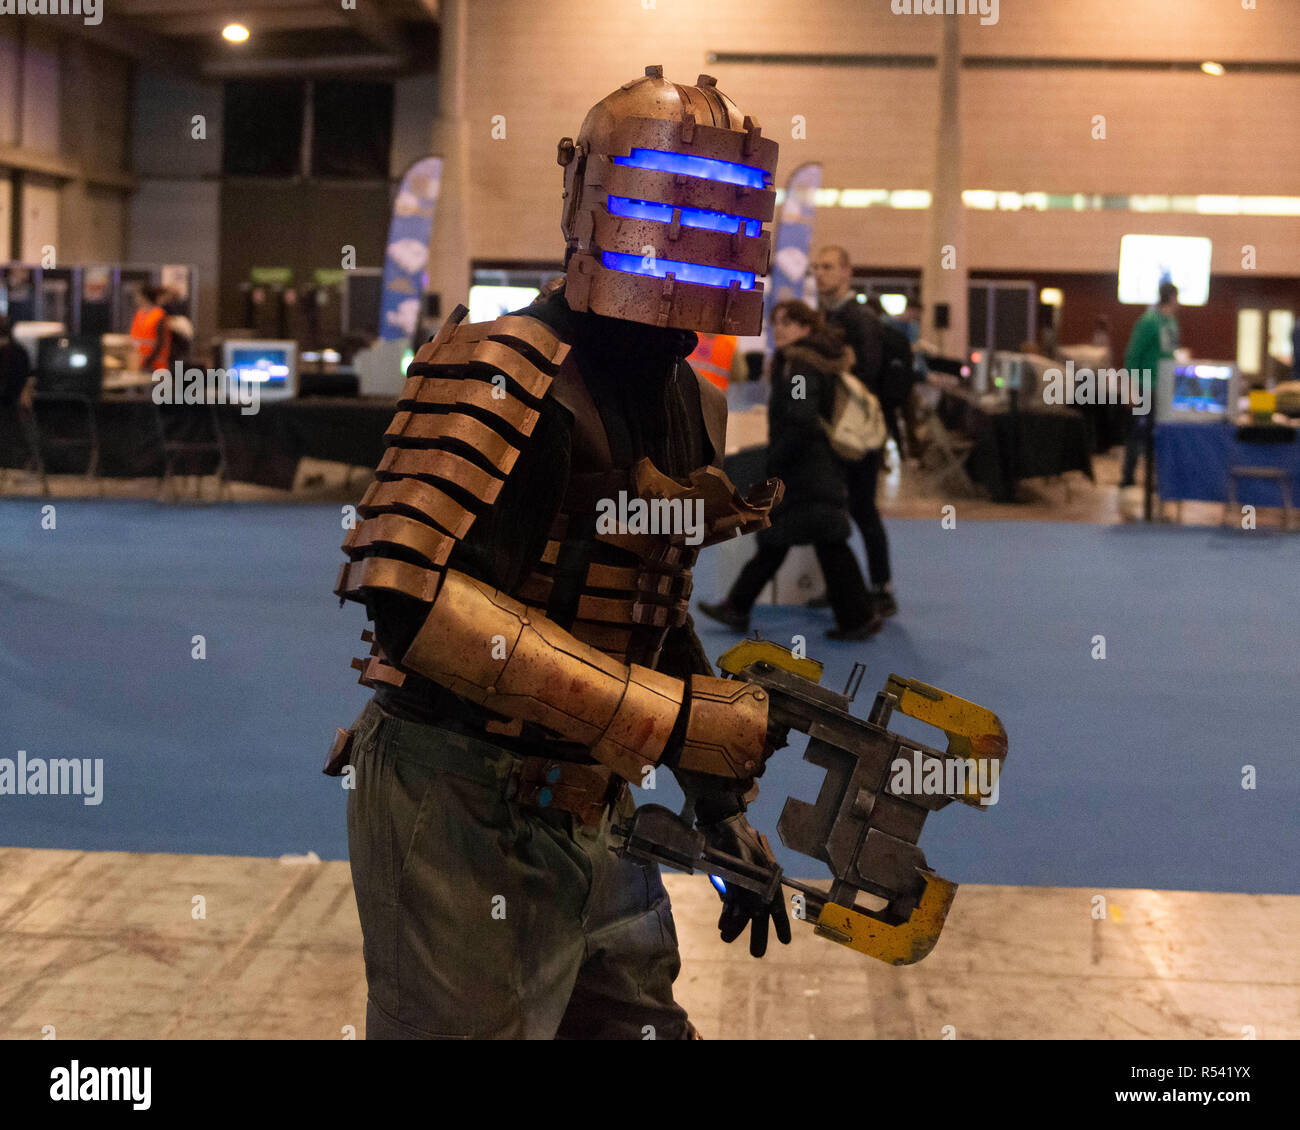 Barcelona, Spain. 29th November, 2018. A man playing driving video games during the Barcelona Games World 2018 at Gran Via Fira on November 28, 2018 in Barcelona, Spain. © Victor Puig/Alamy Live News dressed and made up as one of her favorite videogame characters during the Barcelona Games World 2018 at Gran Via Fira on November 28, 2018 in Barcelona, Spain. © Victor Puig/Alamy Live News Stock Photo